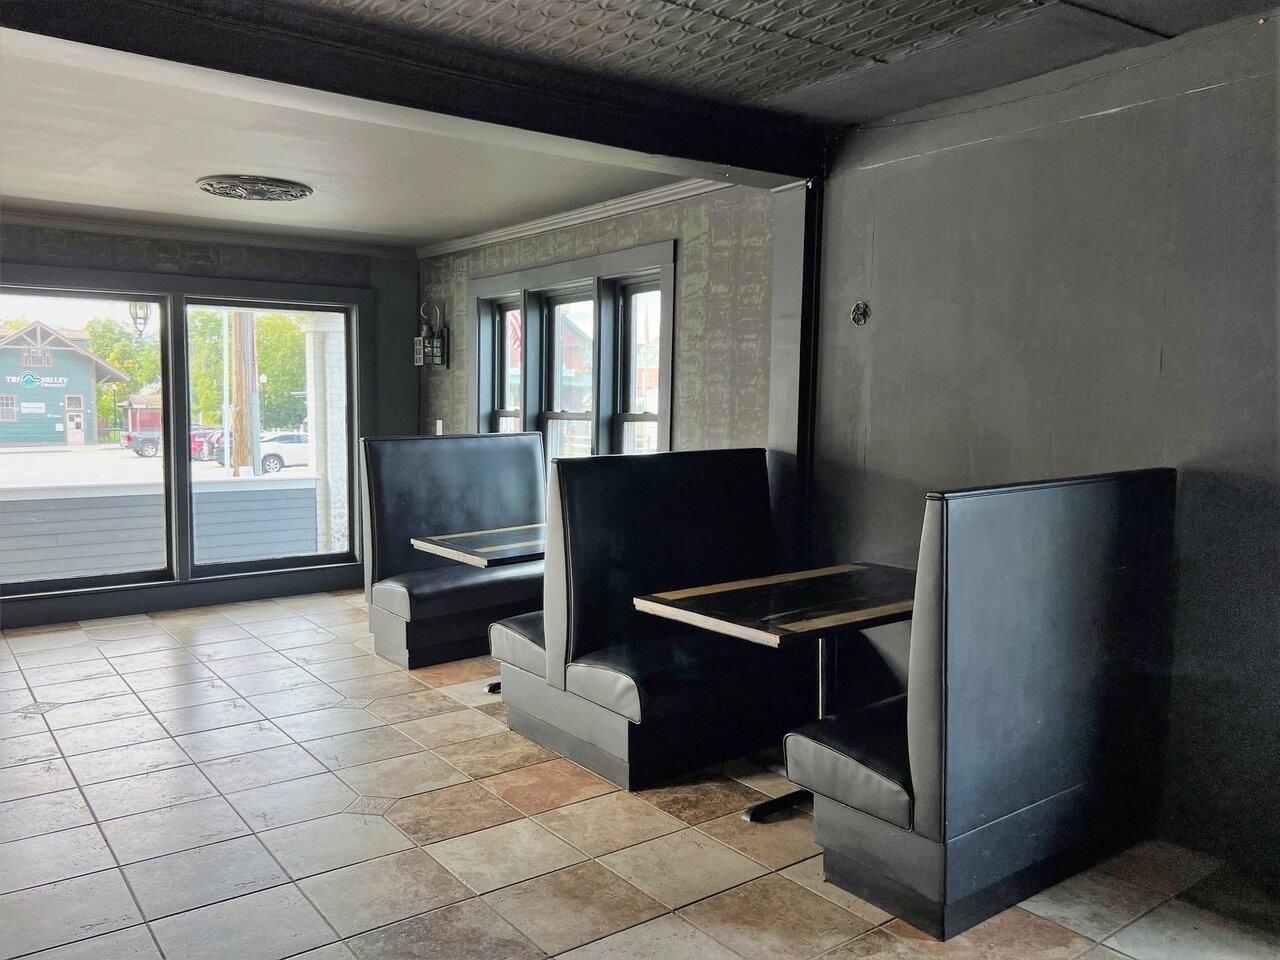 Built-in booths in dining rm